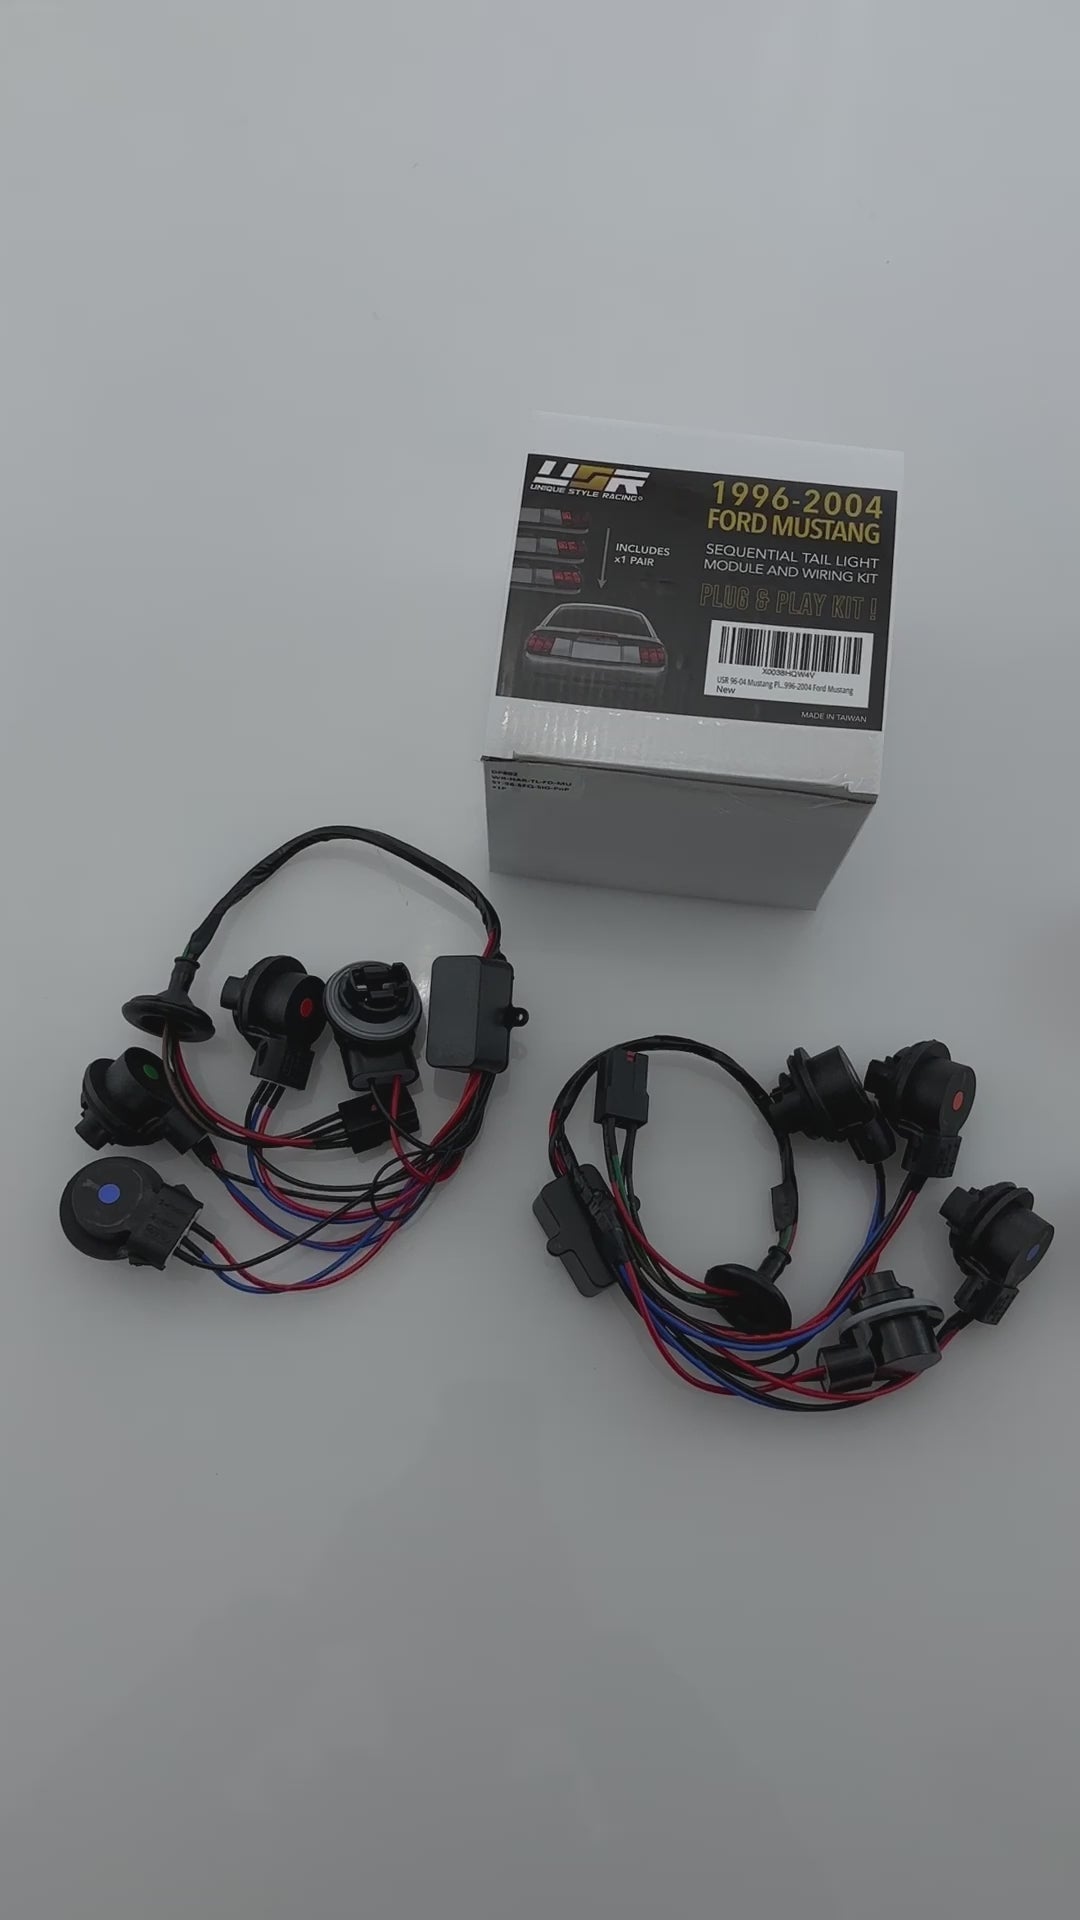 1996-2004 Ford Mustang Sequential Signal Plug and Play Tail Brake Light Harness + Flasher & LED Bulbs - Made by Unique Style Racing